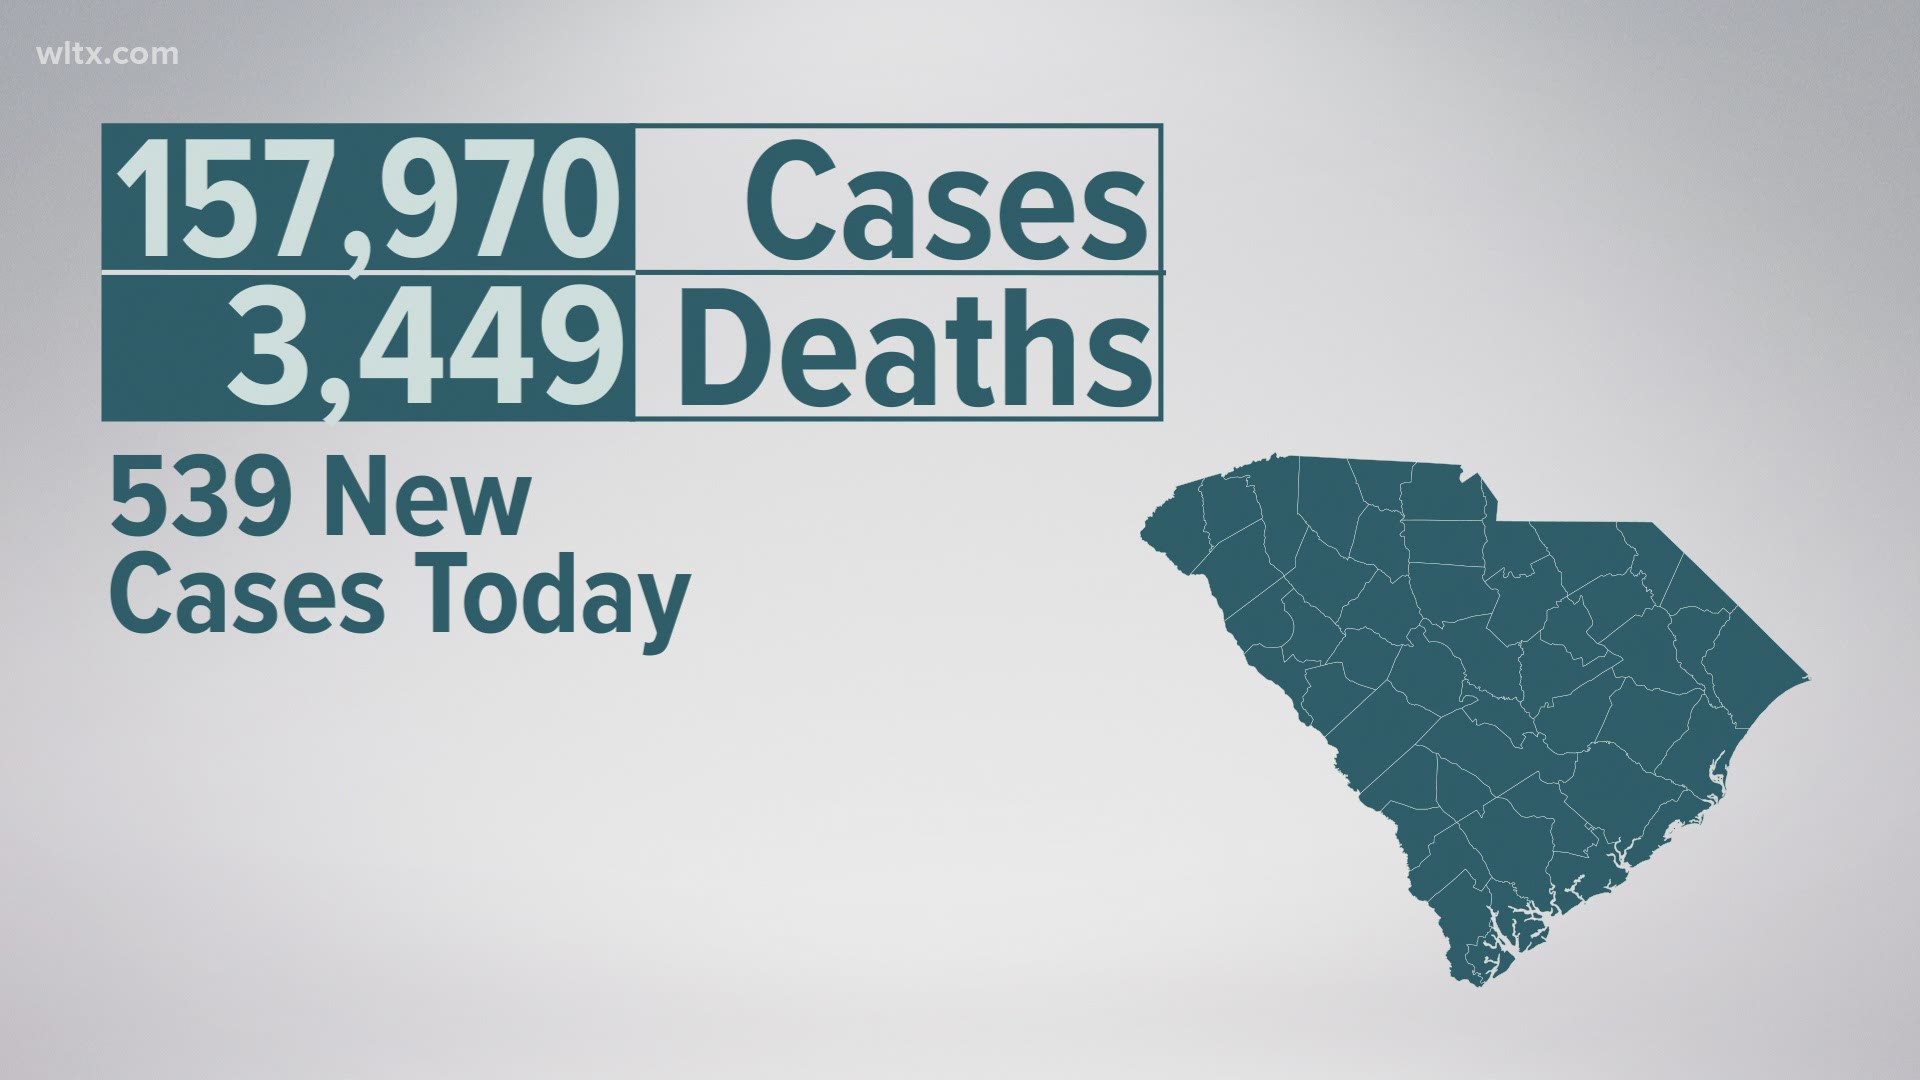 This brings the total number of confirmed cases to 157,970, probable cases to 6,639, confirmed deaths to 3,449, and 212 probable deaths